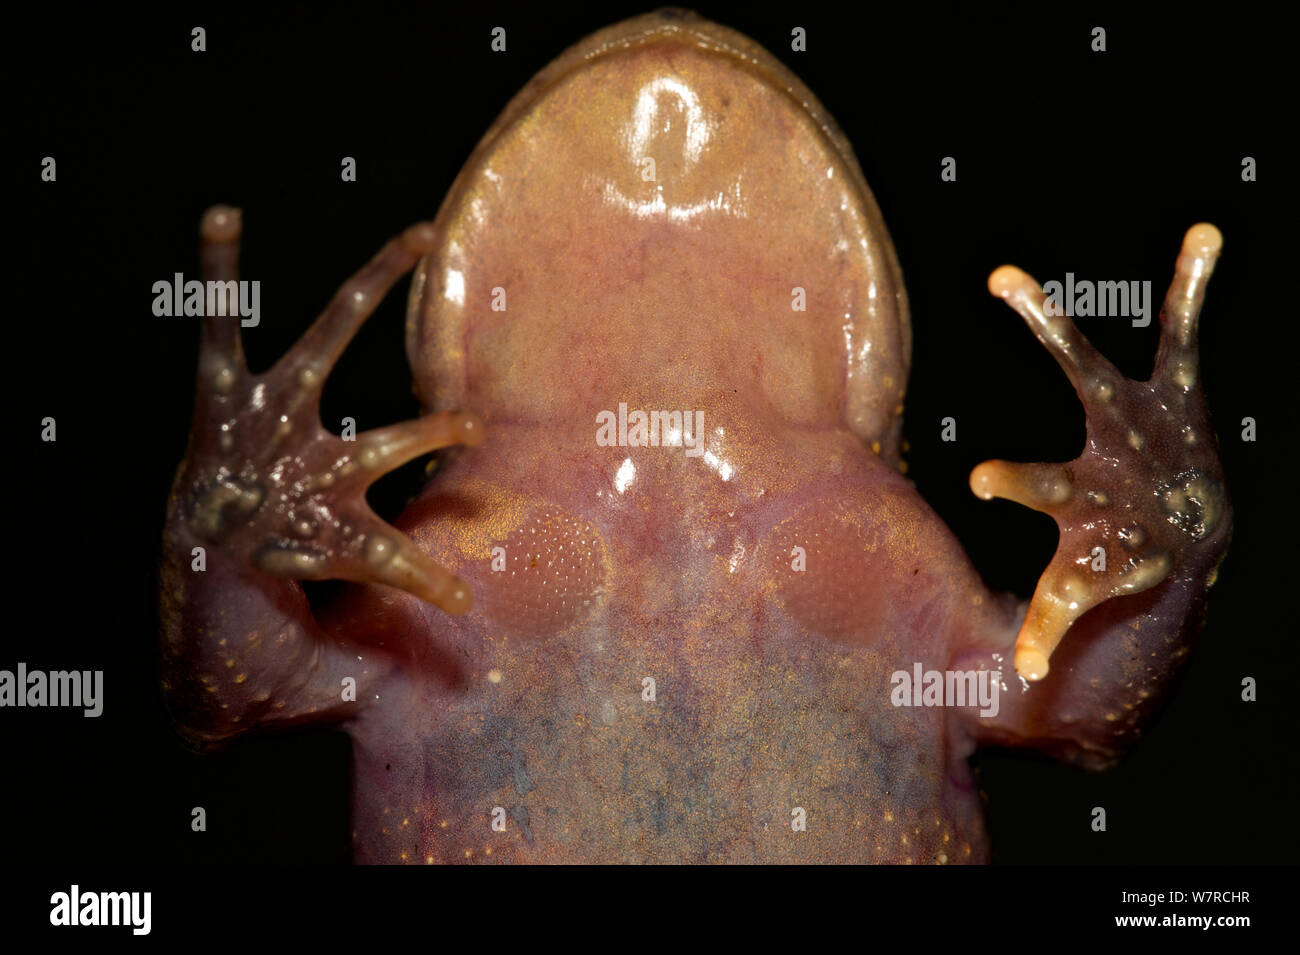 Ventral view of a male Spiny-chested Frog (Alsodes hugoi) showing gland clusters, Chile, January, Controlled conditions Stock Photo